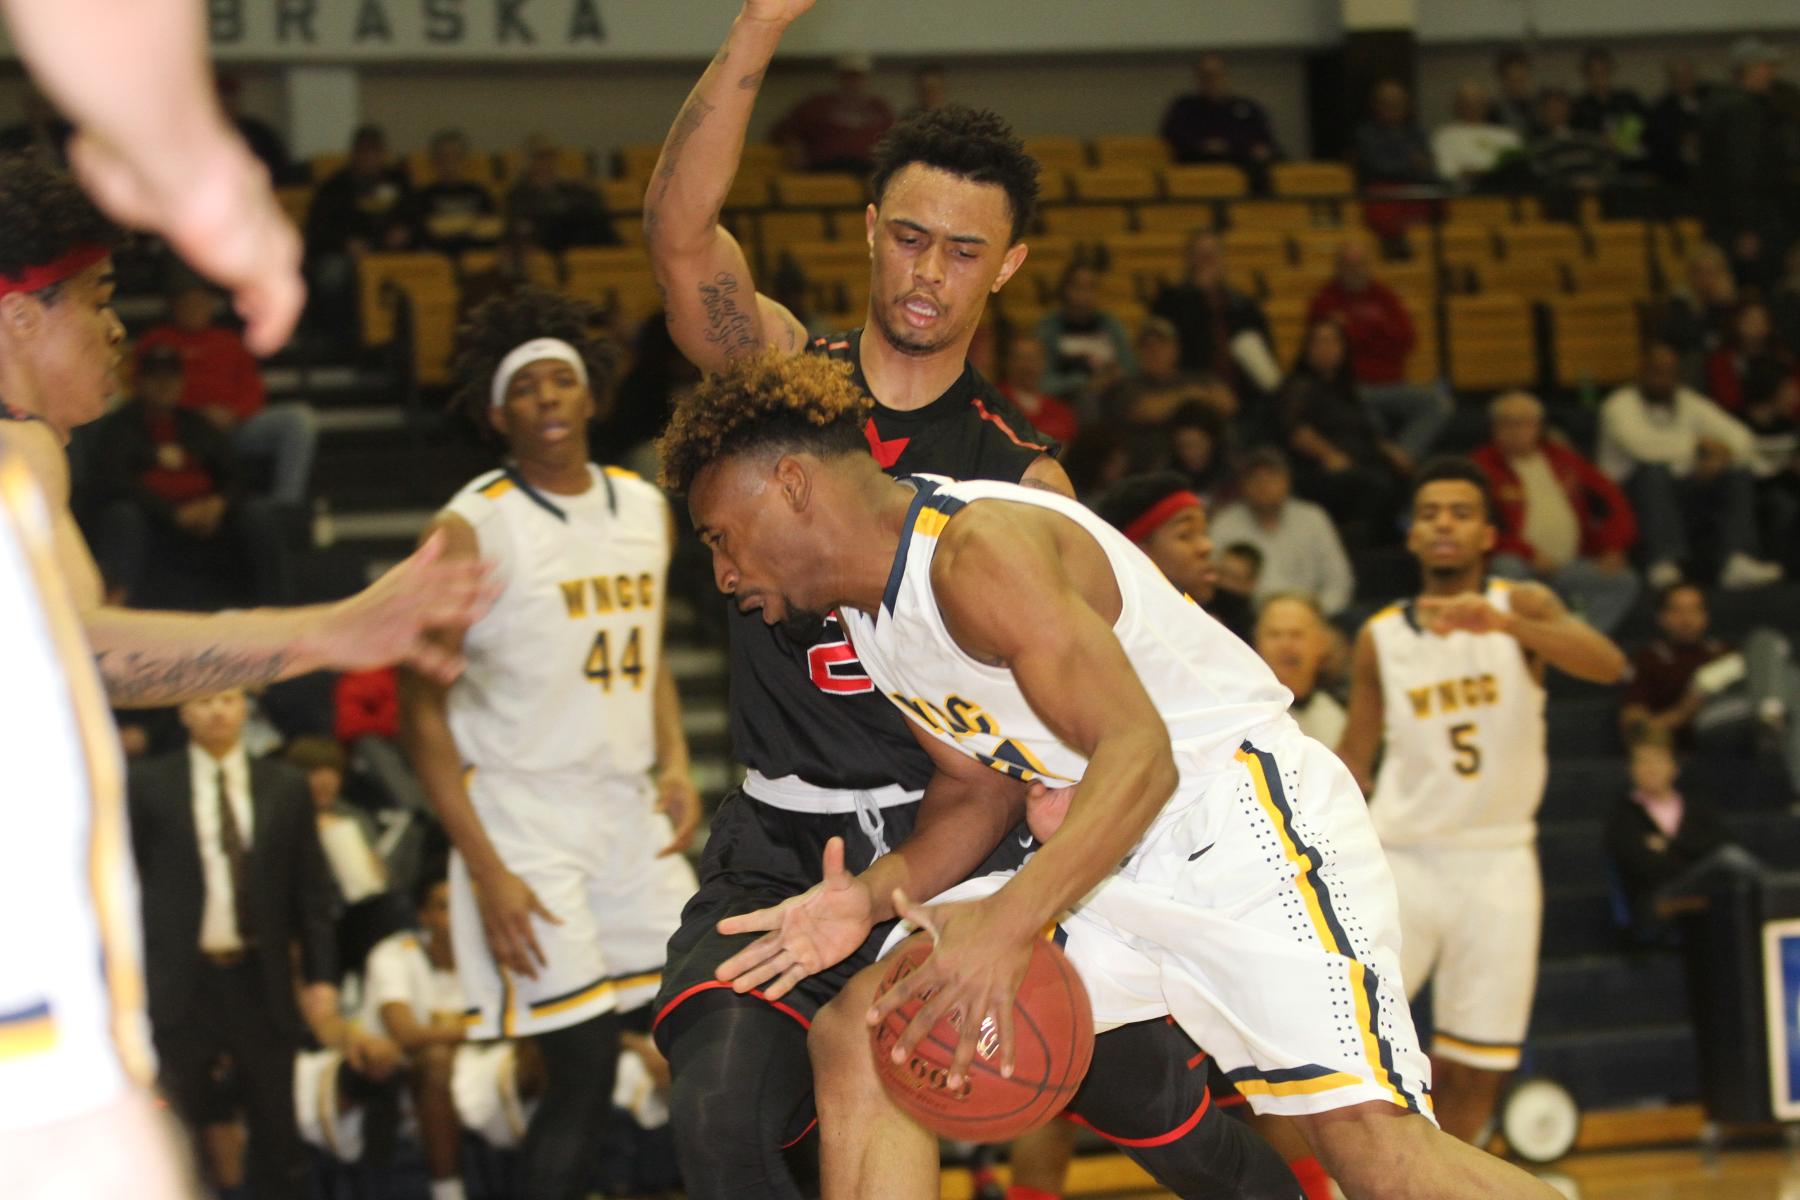 Strong second half powers WNCC over Casper